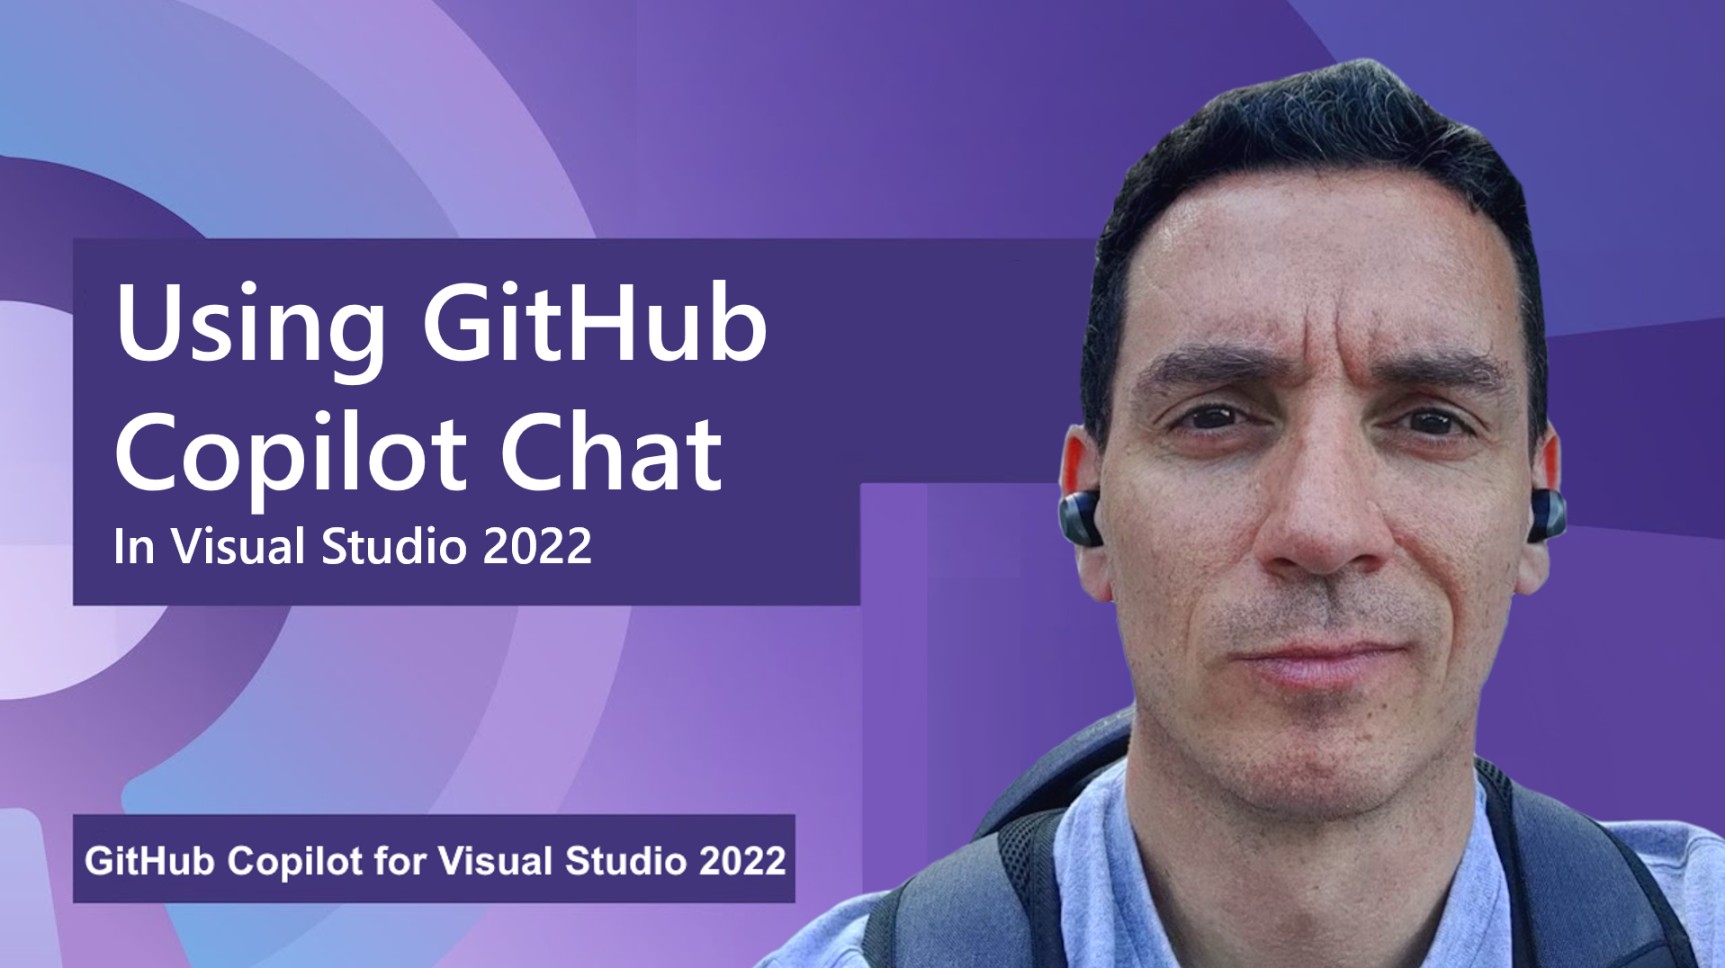 A step-by-step guide to use GitHub Copilot Chat in Visual Studio